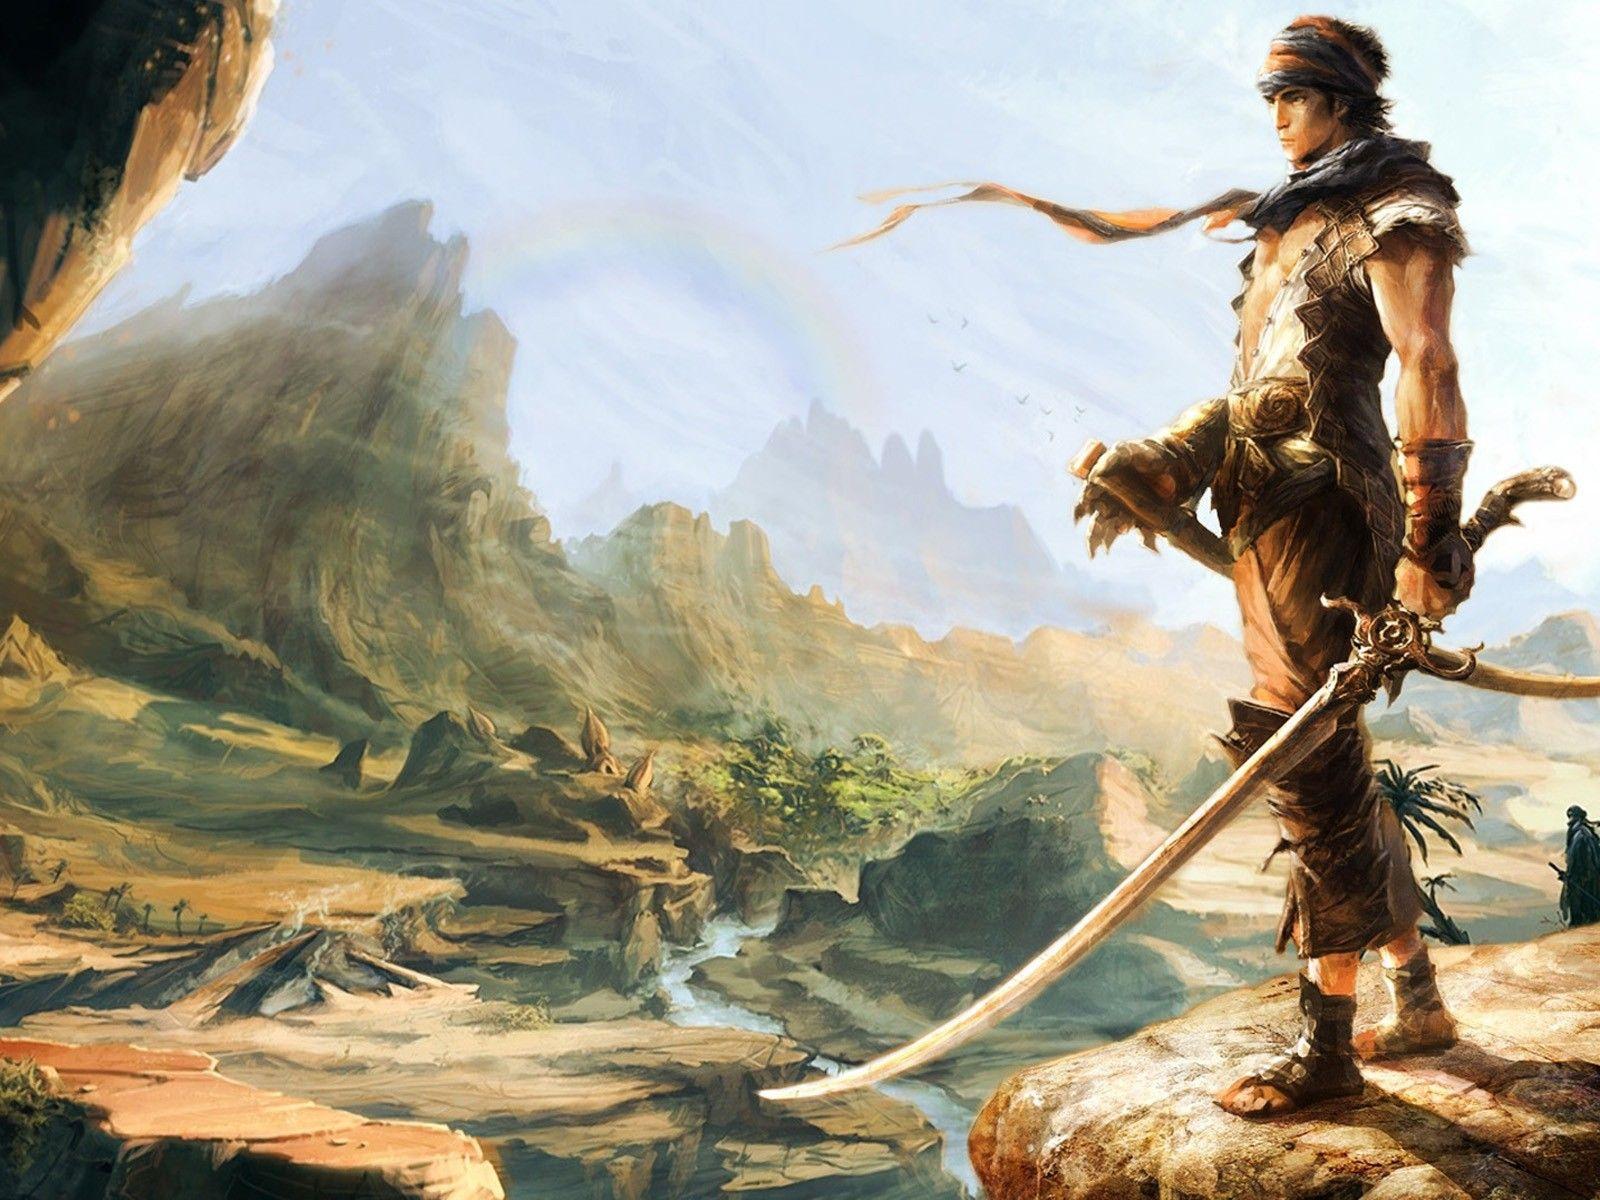 Warrior with a sword wallpaper and image, picture